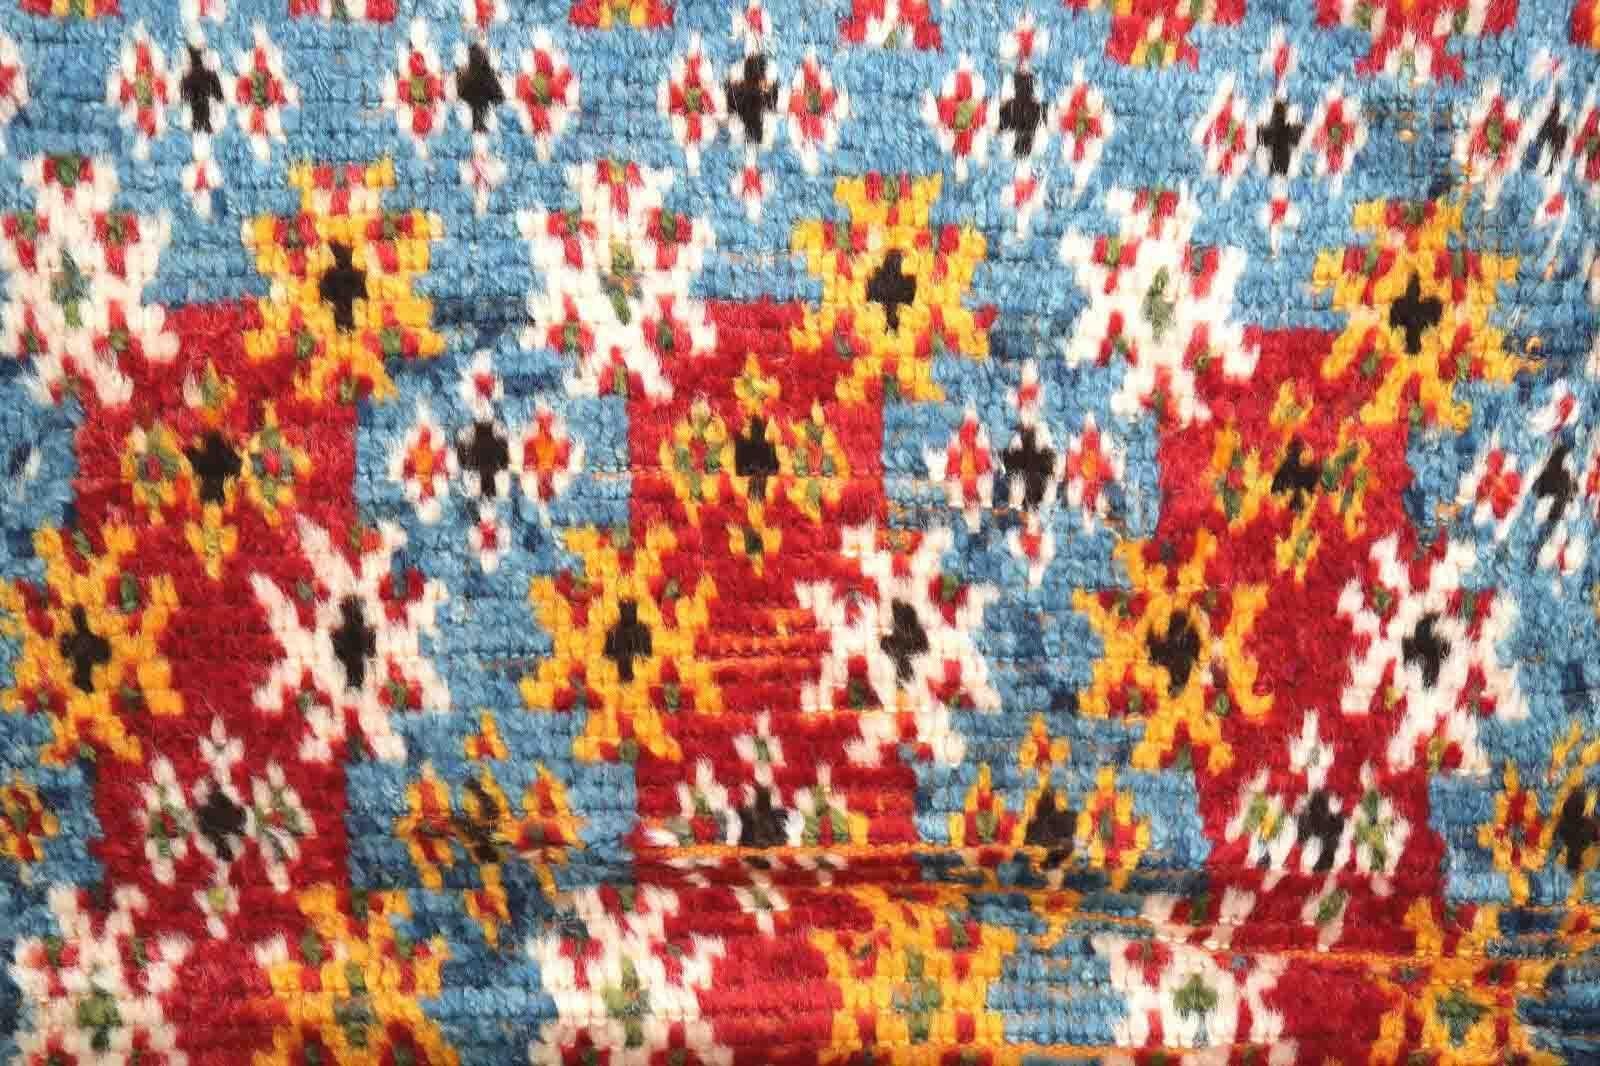 Handmade antique Moroccan Berber rug in geometric design. Ait Ouaouzguit tribe rug from Ourzazate region in the High Atlas, Morocco. The rug is from the beginning of 20th century in original good condition.

-condition: original good,

-circa: